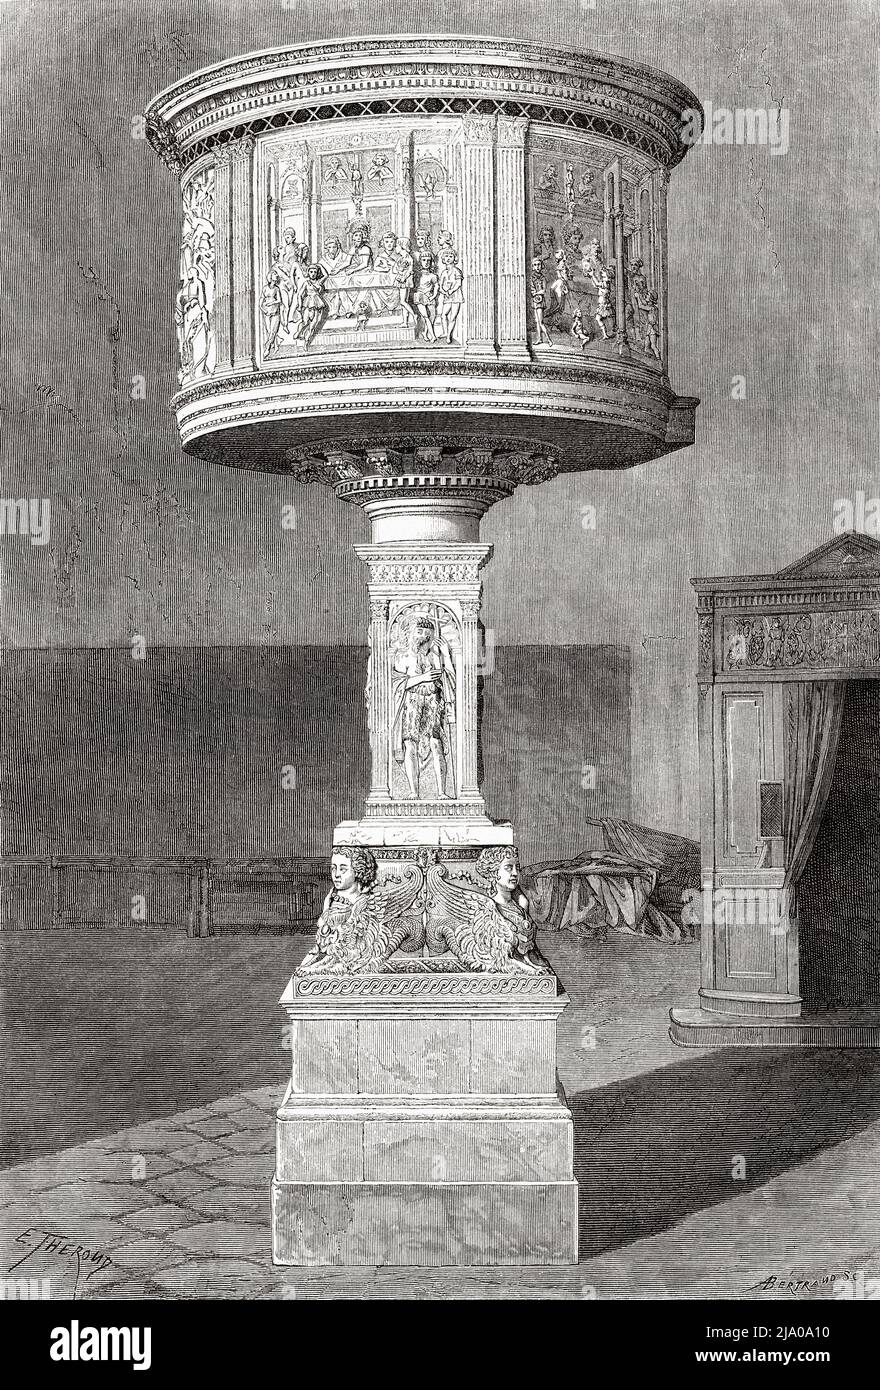 Pulpit by Rossellini and Mino da Fiesole. Cathedral of Saint Stephen in Prato, Tuscany, Central Italy. Europe. Small Towns and Great Art in Tuscany by Henri Belle 1871. Le Tour du Monde 1879 Stock Photo